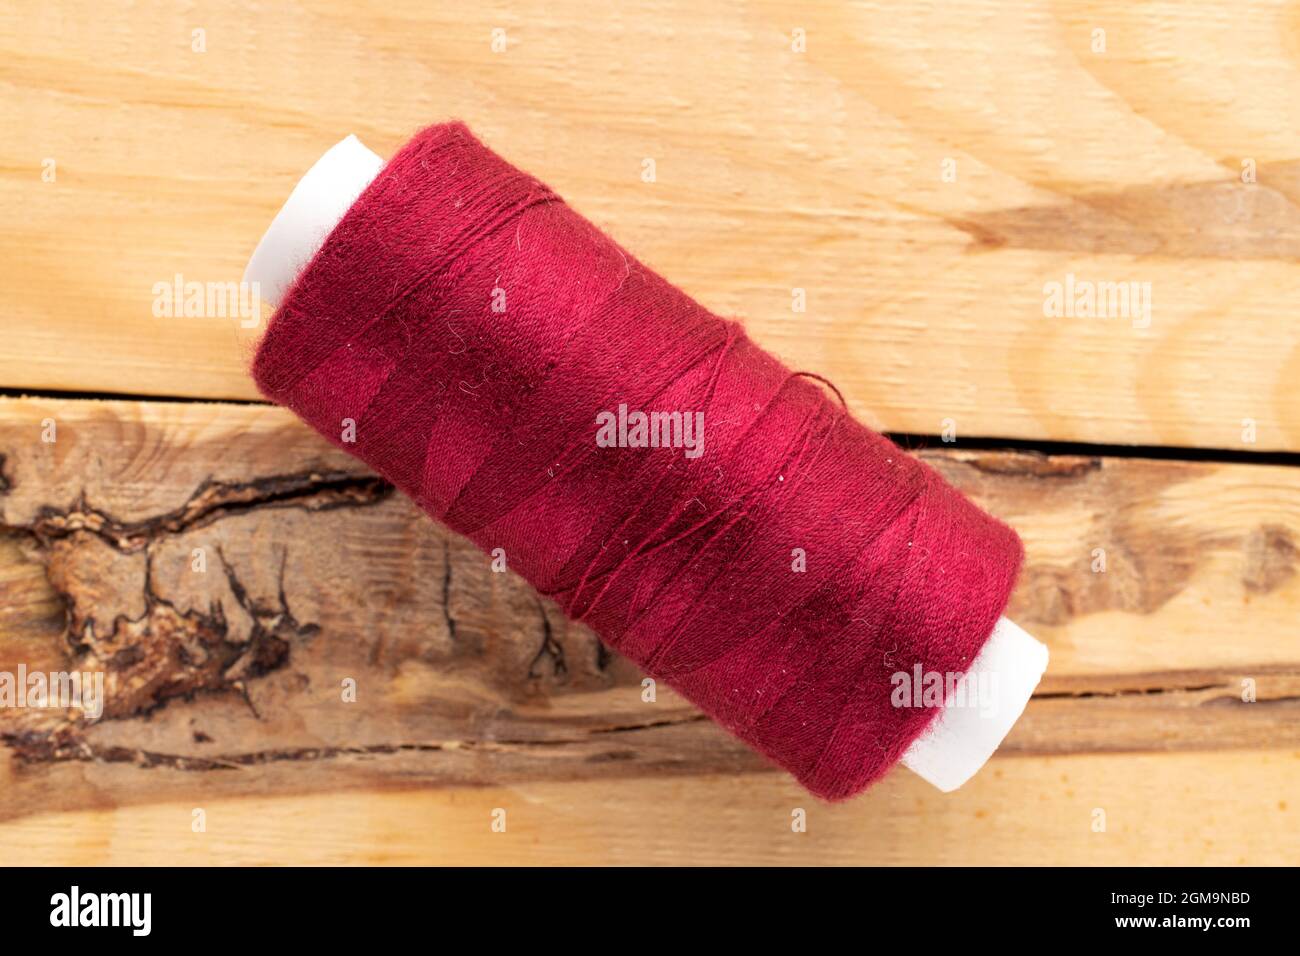 One spool of burgundy thread, close-up, on a wooden table, top view. Stock Photo